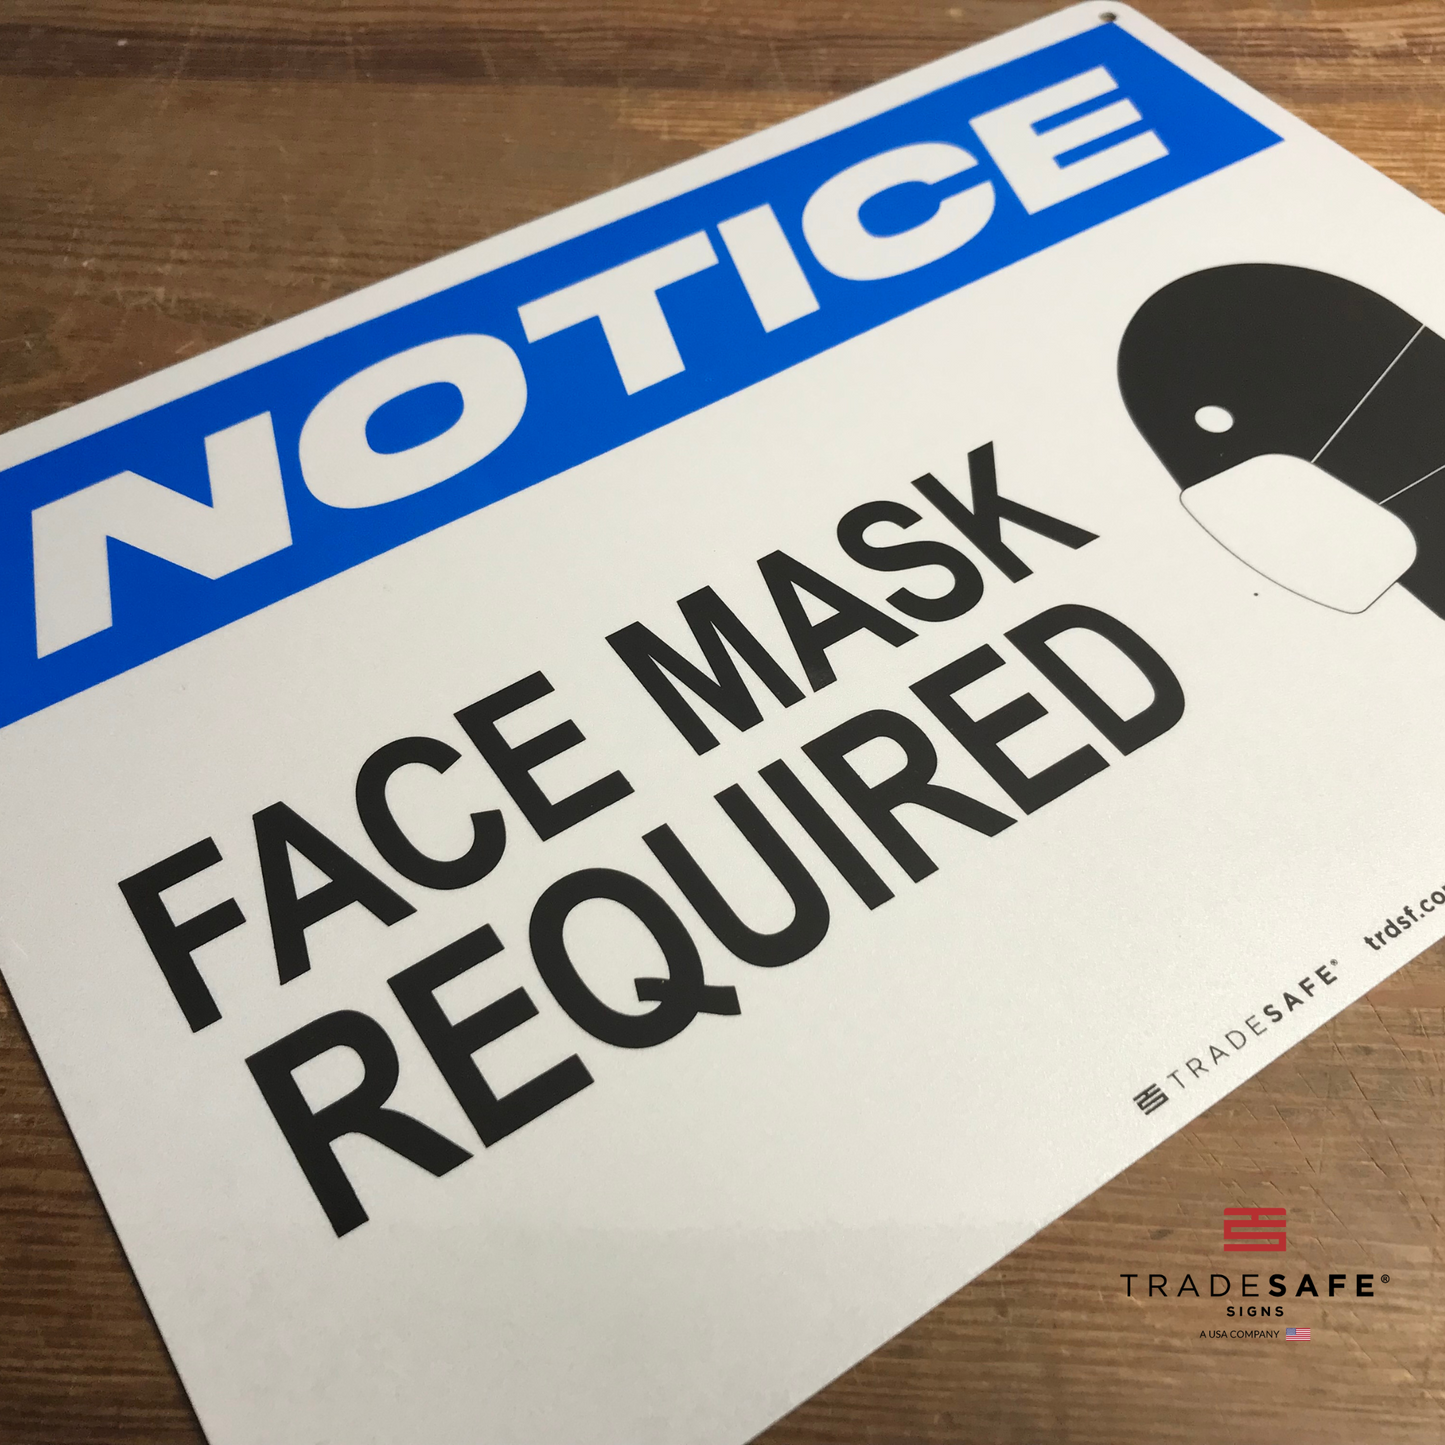 vibrant and highly visible face mask required sign